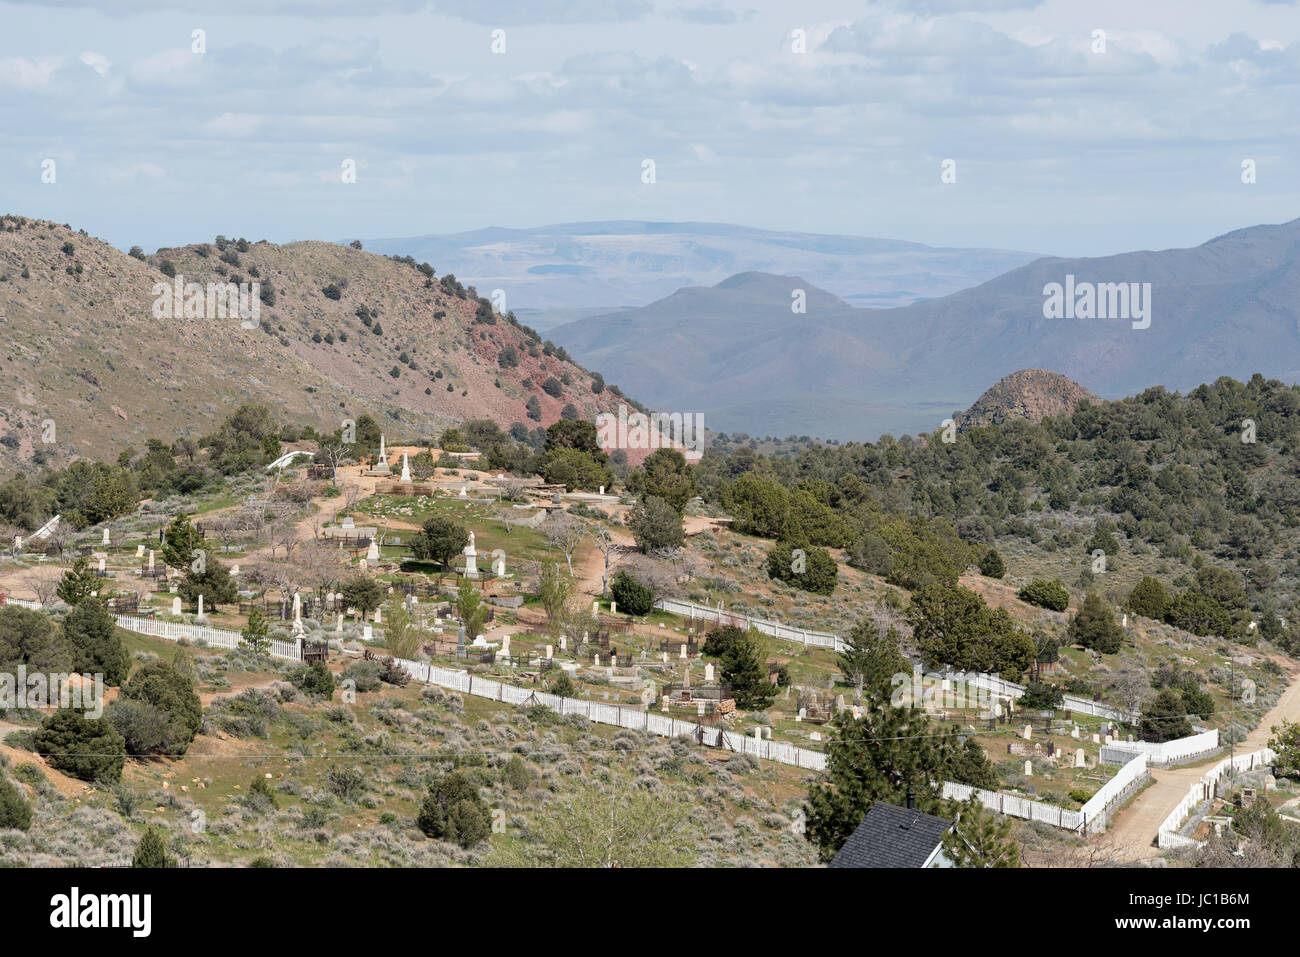 Silver Terrace Cemetery at the edge of the historic mining town of Virginia City, Nevada. Stock Photo